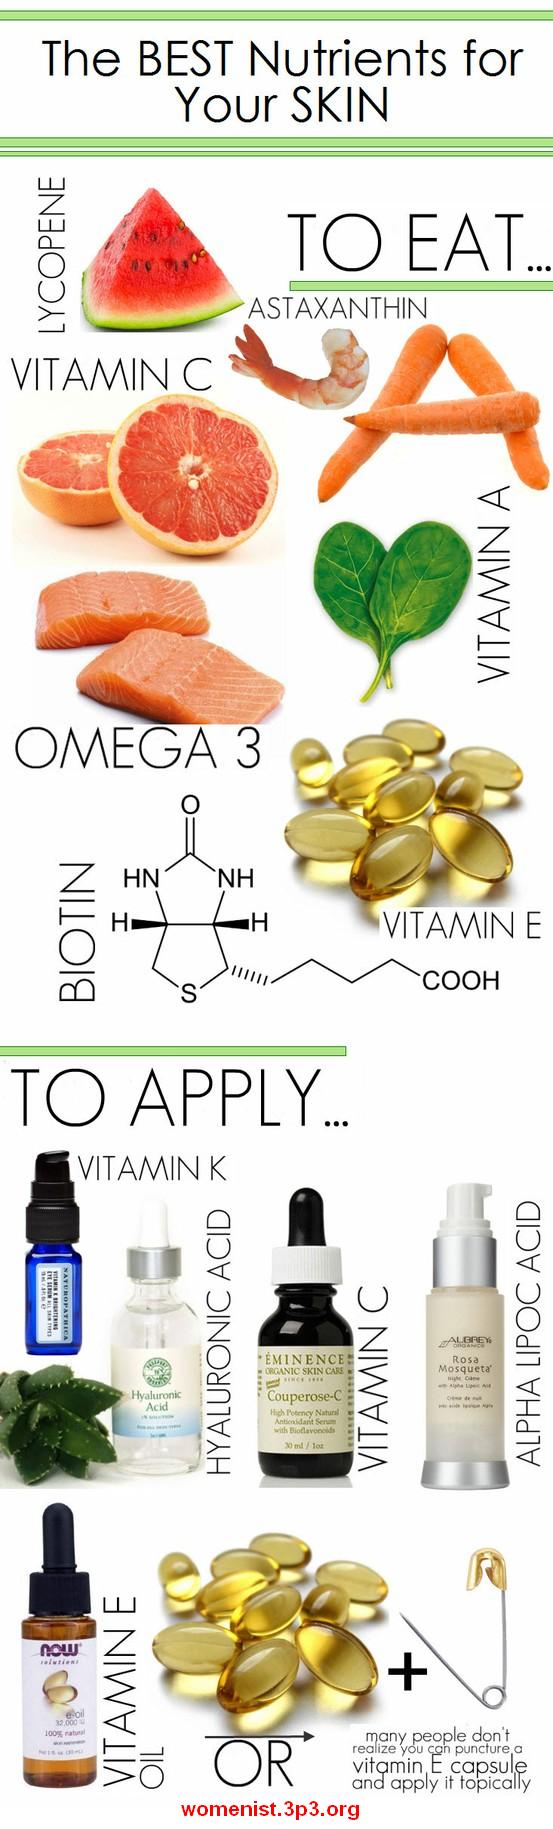 Infographic The Best Nutrients for Your Skin The